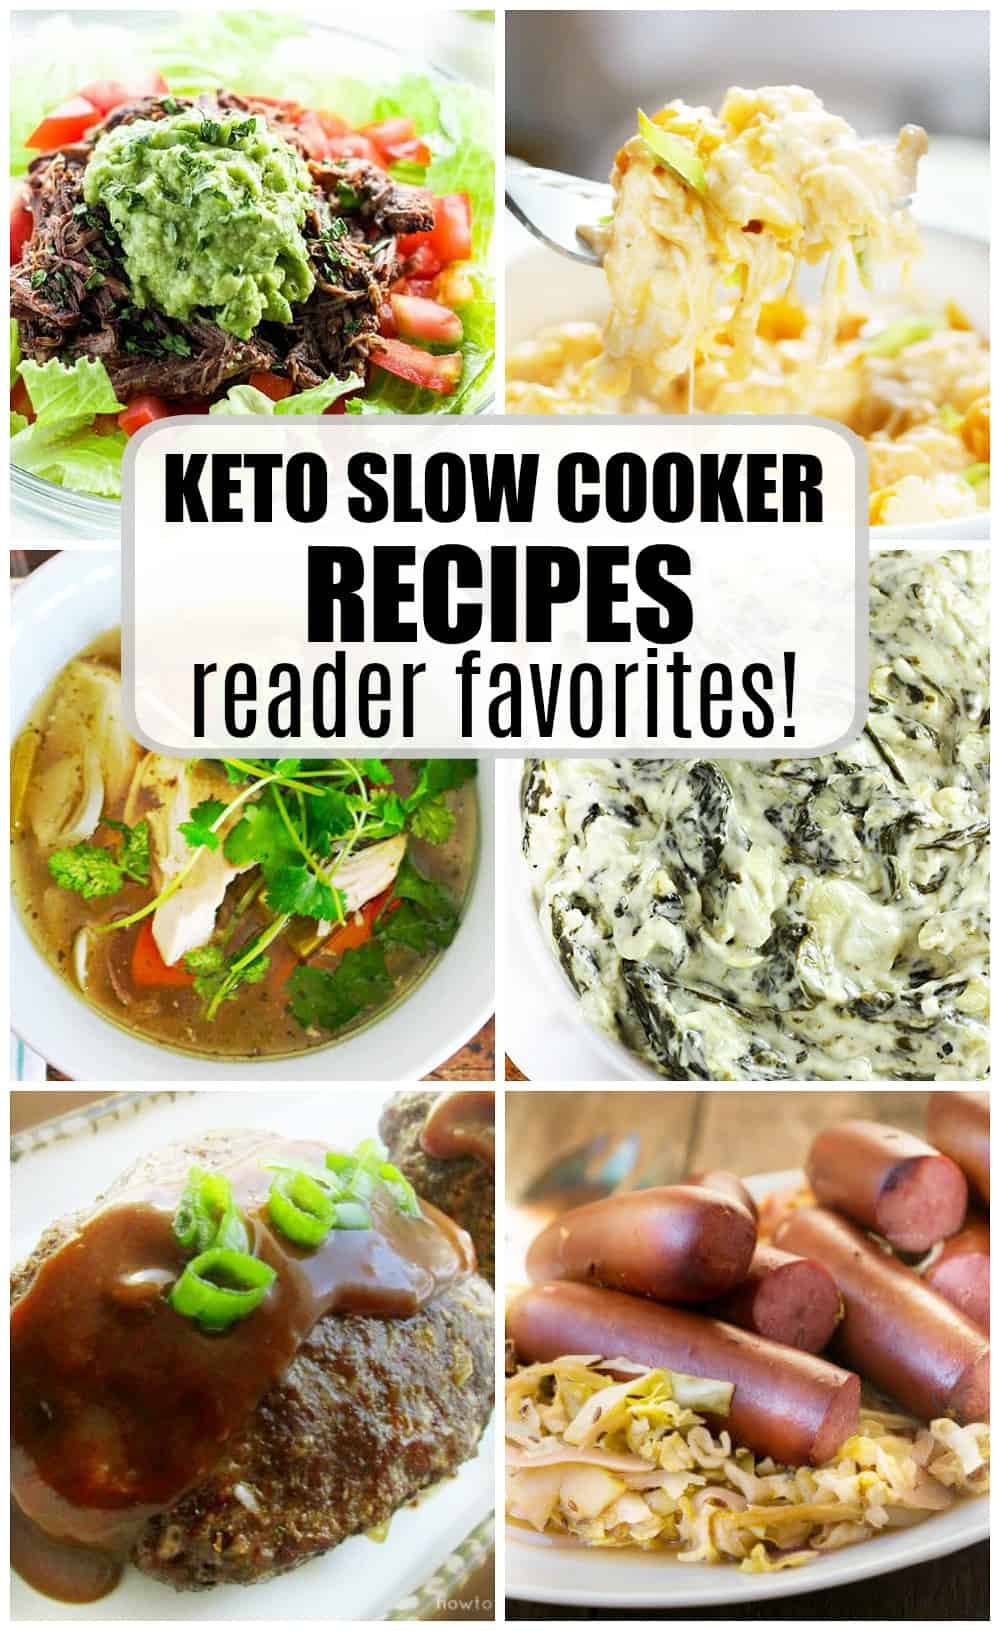 Low Cholesterol Slow Cooker Recipes
 Best 35 Low Cholesterol Slow Cooker Recipes Best Round